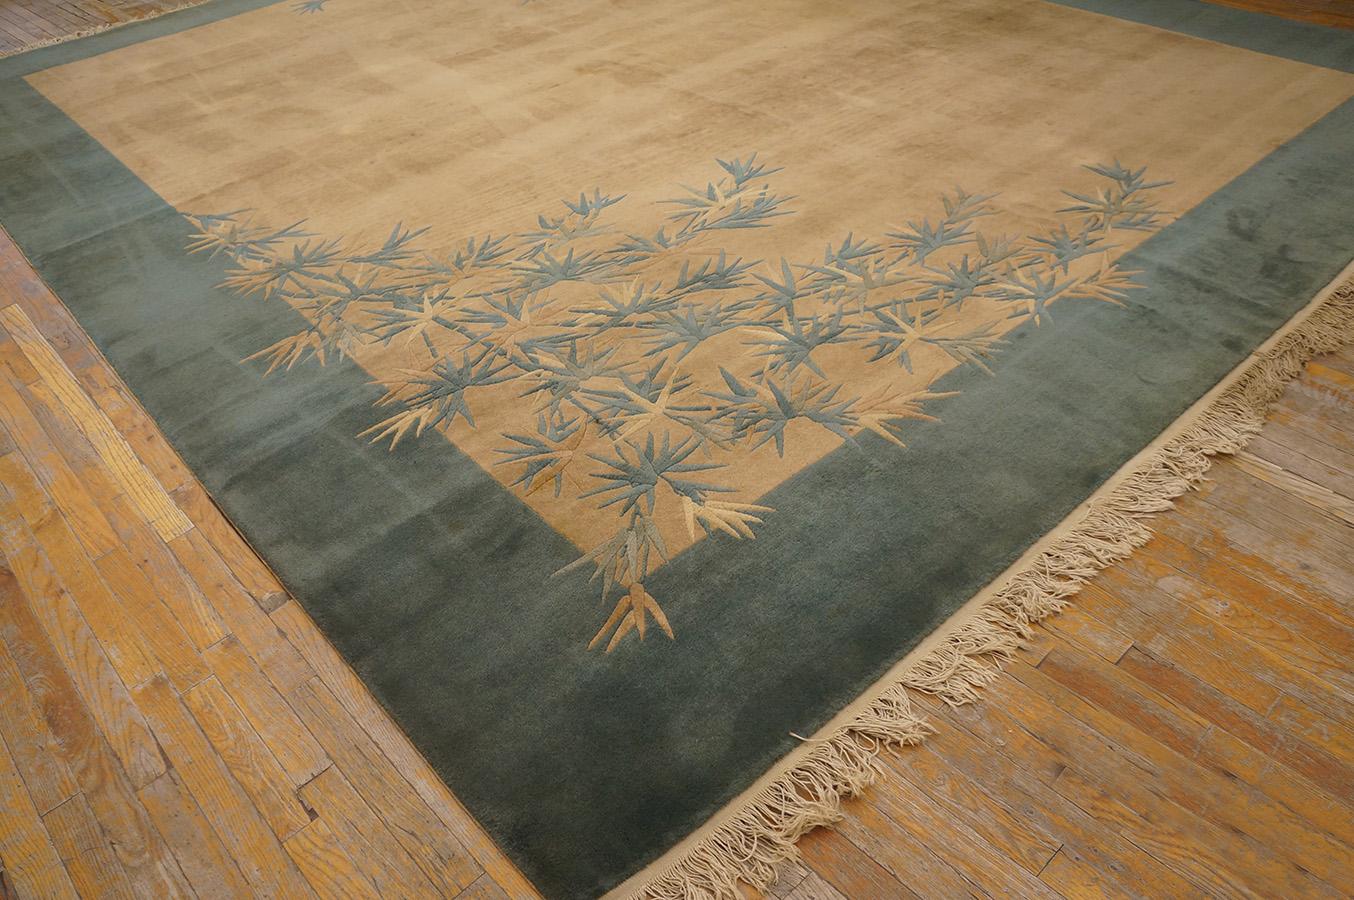 1920s Chinese Art Deco Carpet ( 11' 10'' x 14' 8'' - 360 x 447 cm ) In Good Condition For Sale In New York, NY